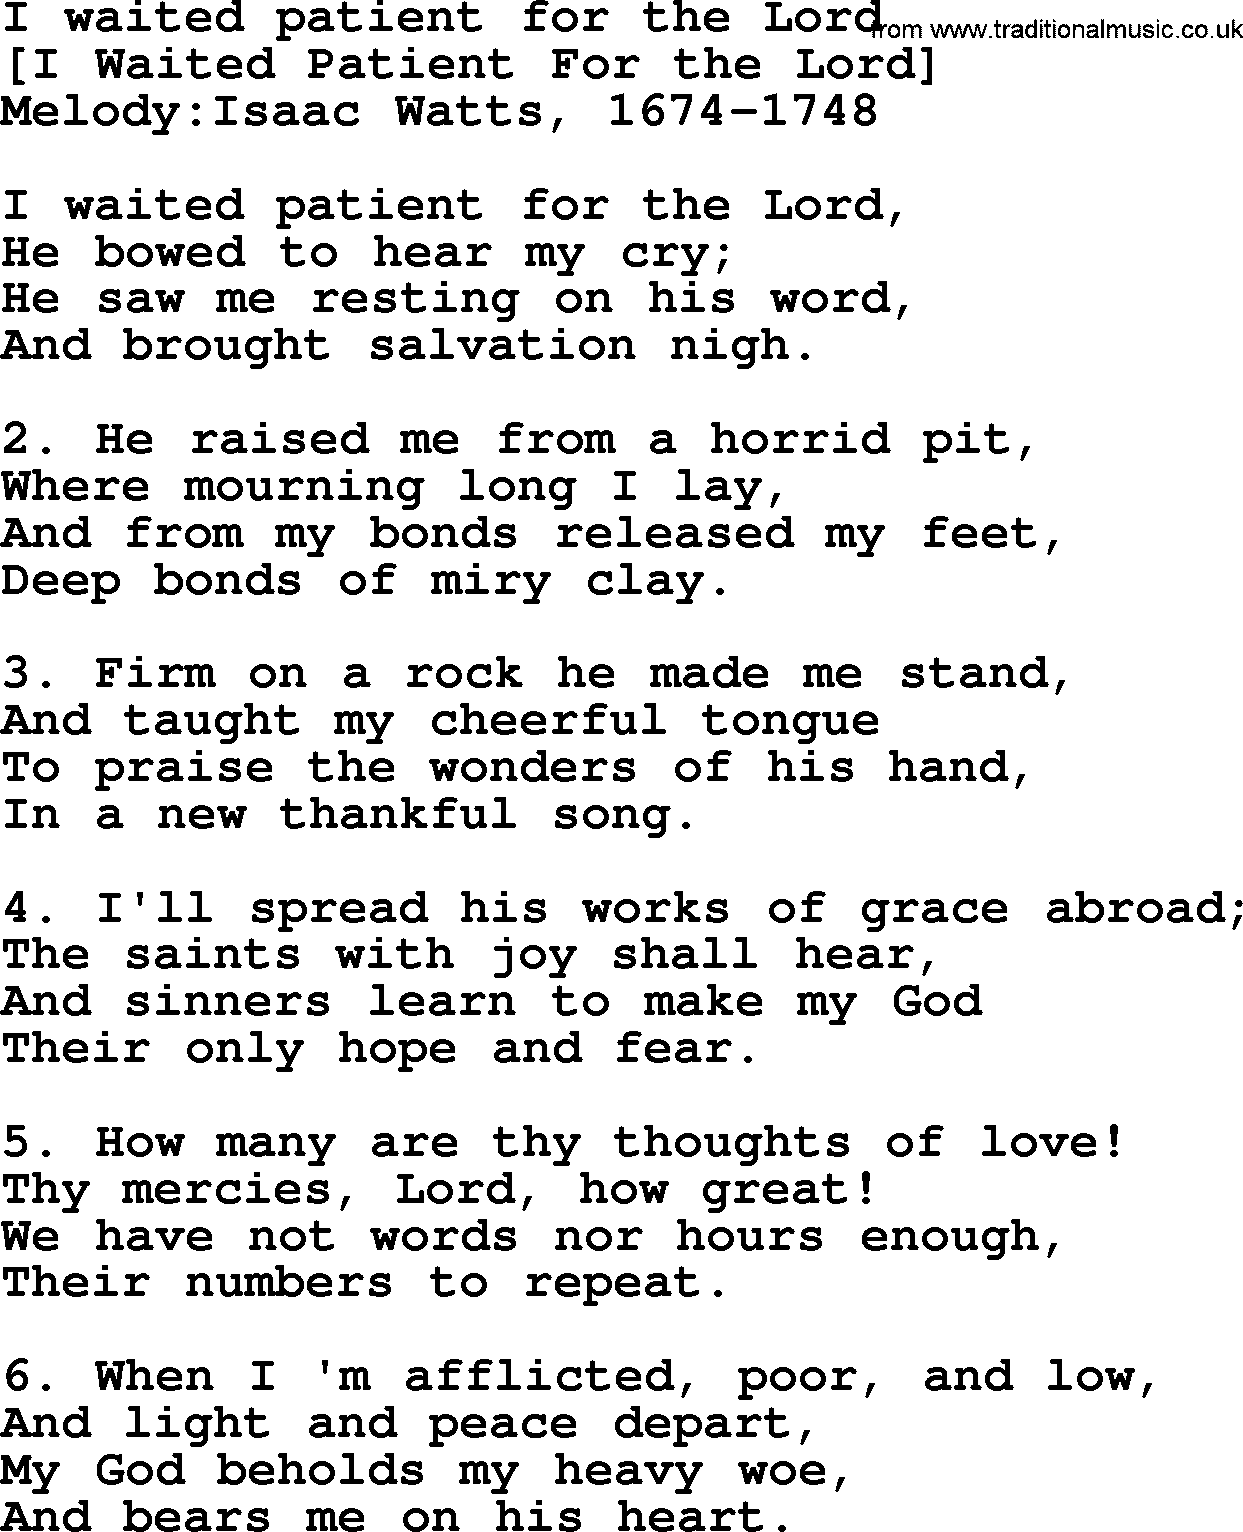 Old English Song: I Waited Patient For The Lord lyrics